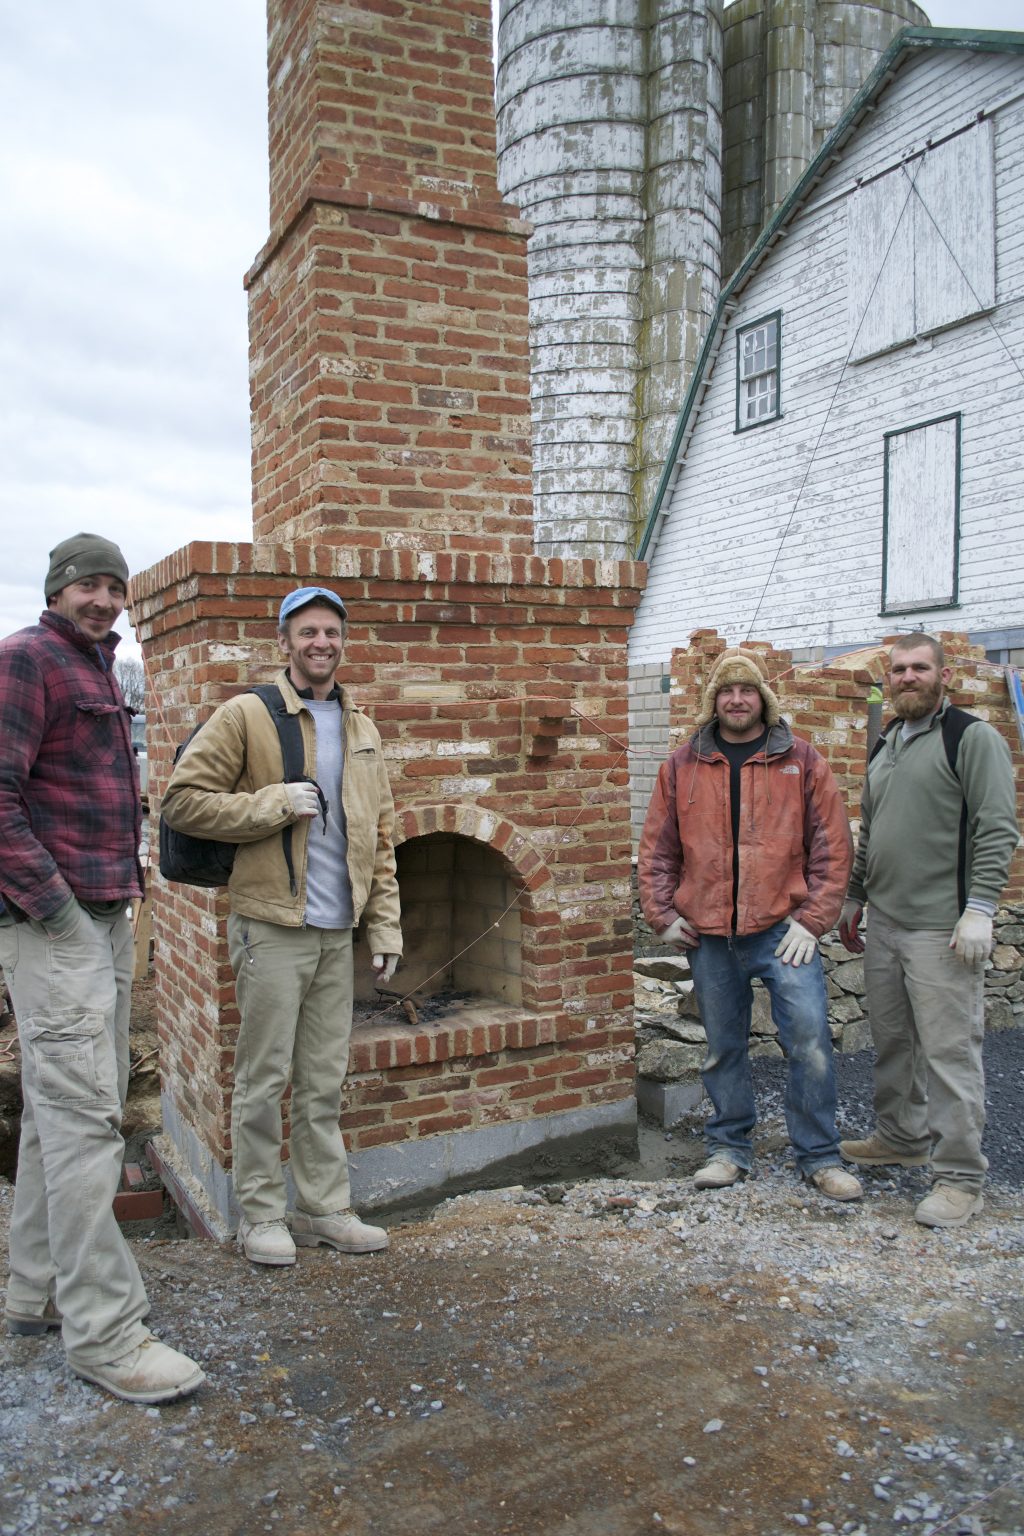 The irrepressible crew, who worked through wind, rain, and snow to finish this huge job inside of a month.